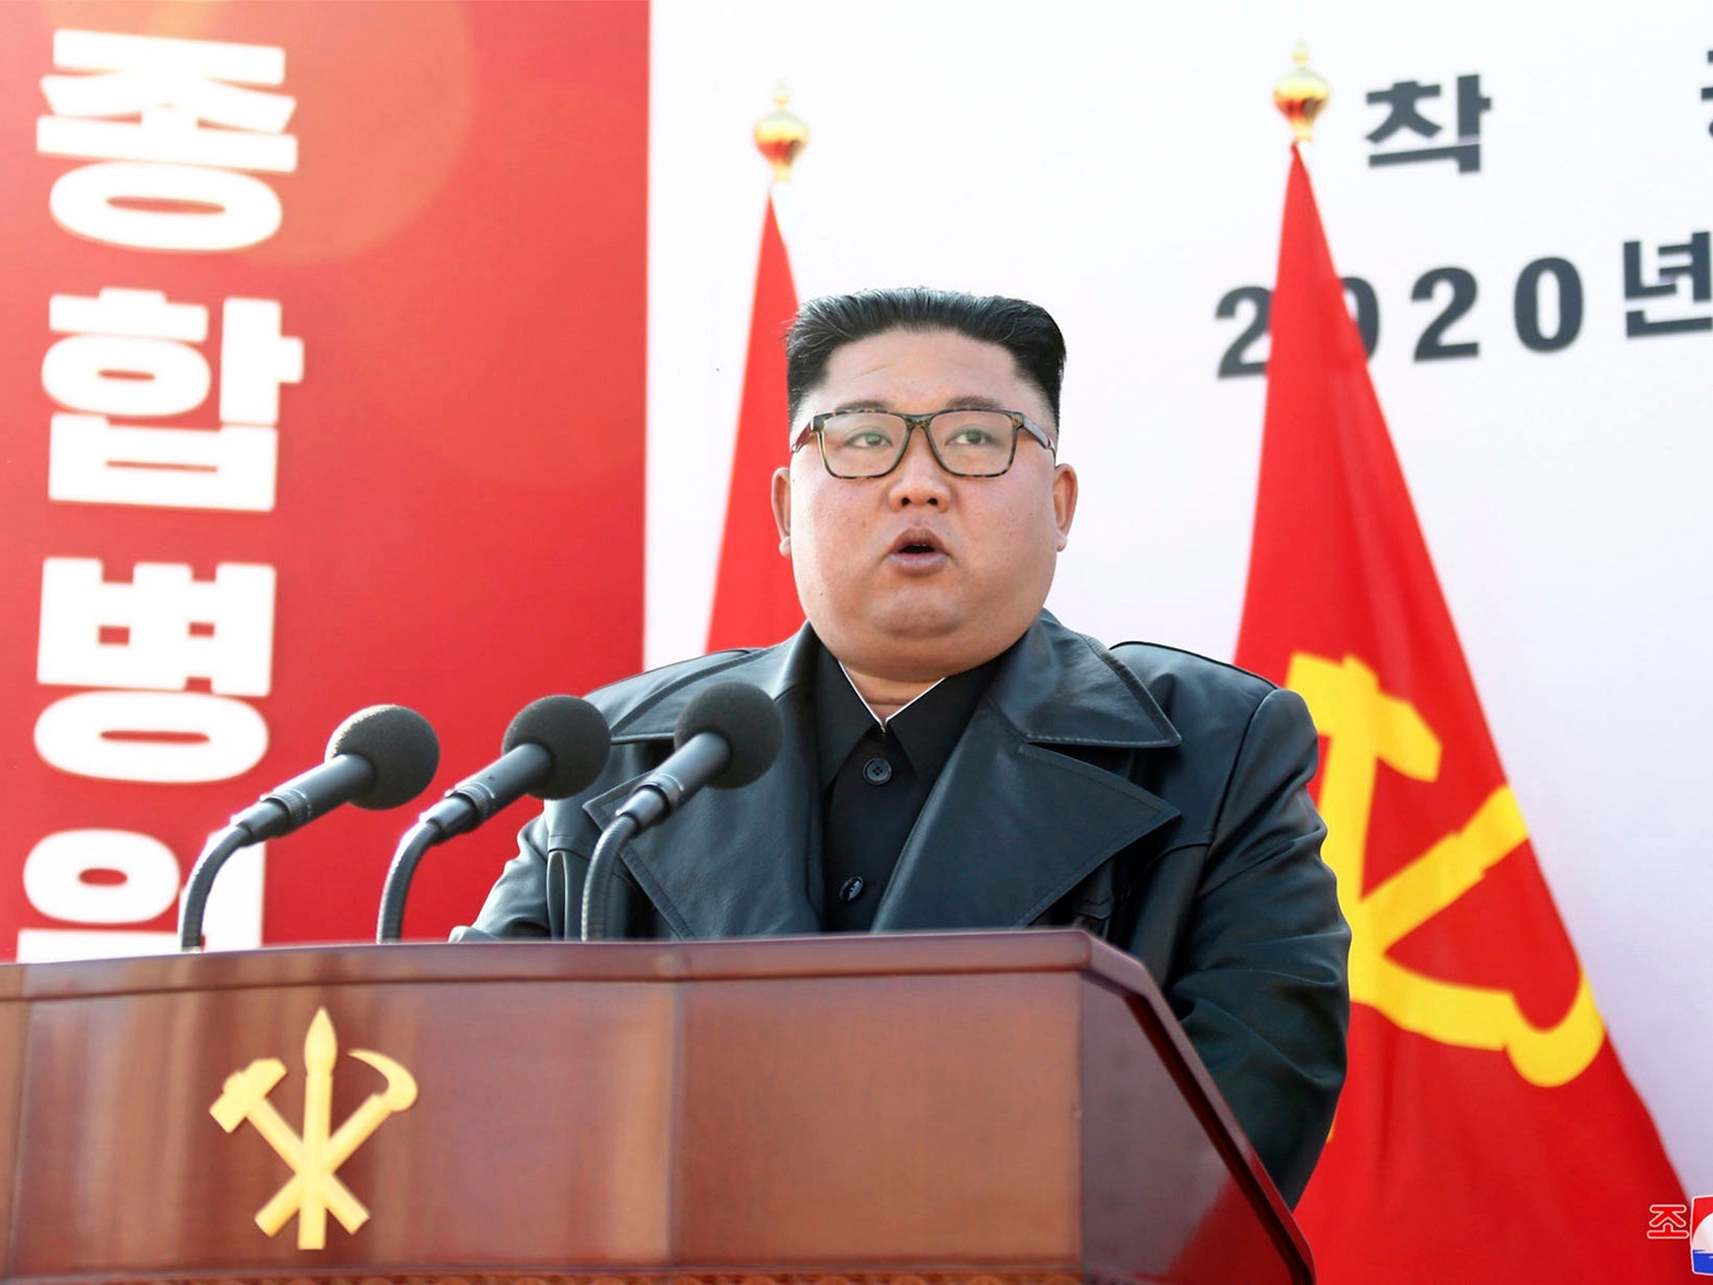 North Korean leader Kim Jong Un delivers a speech during the ground-breaking ceremony of a general hospital in Pyongyang